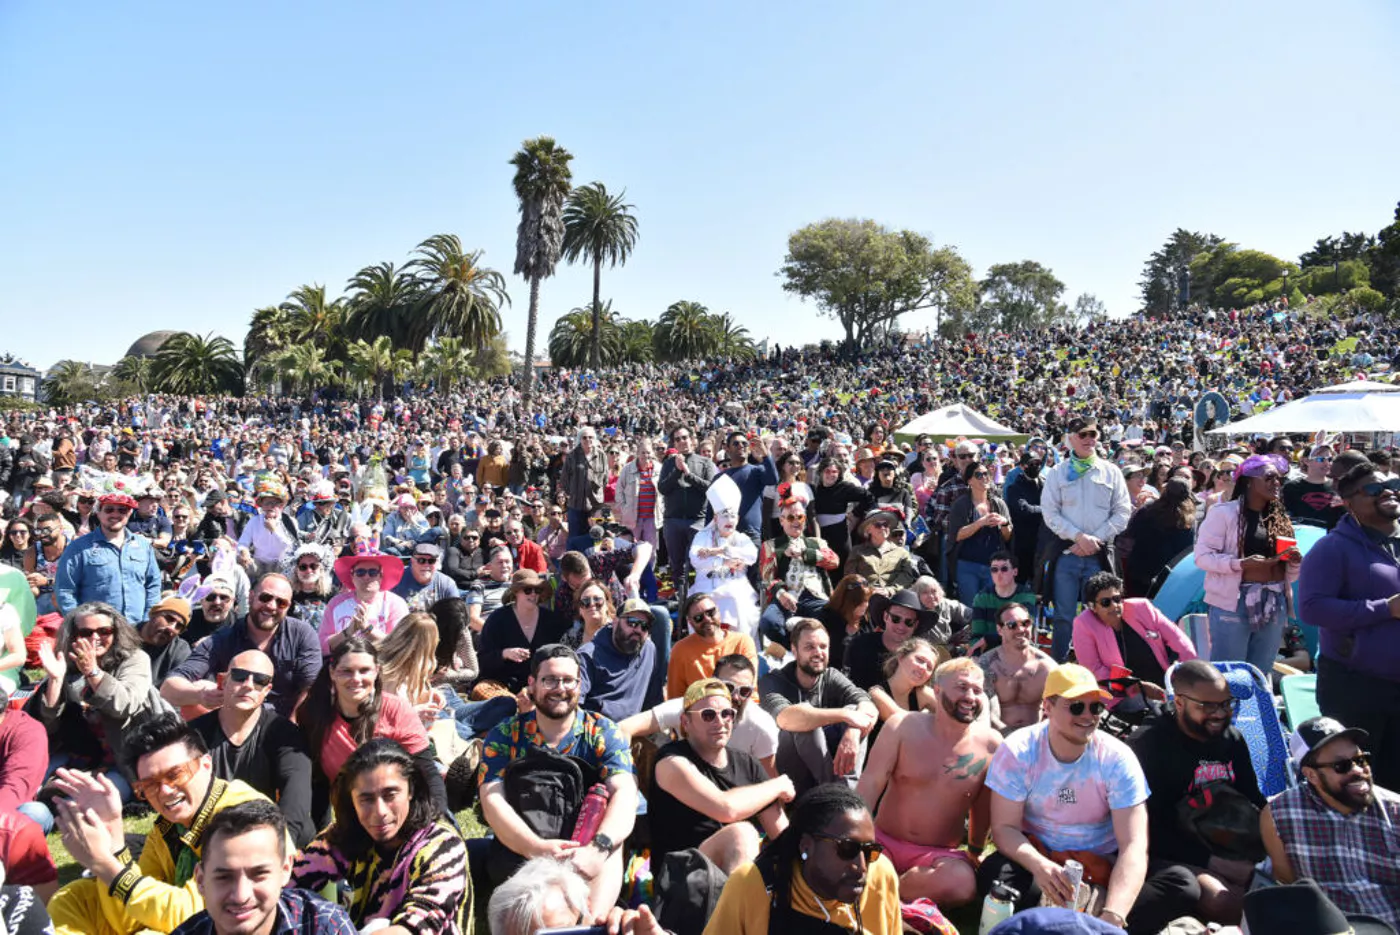 The crowd at Dolores Park during Hunky Jesus Costume Contest.